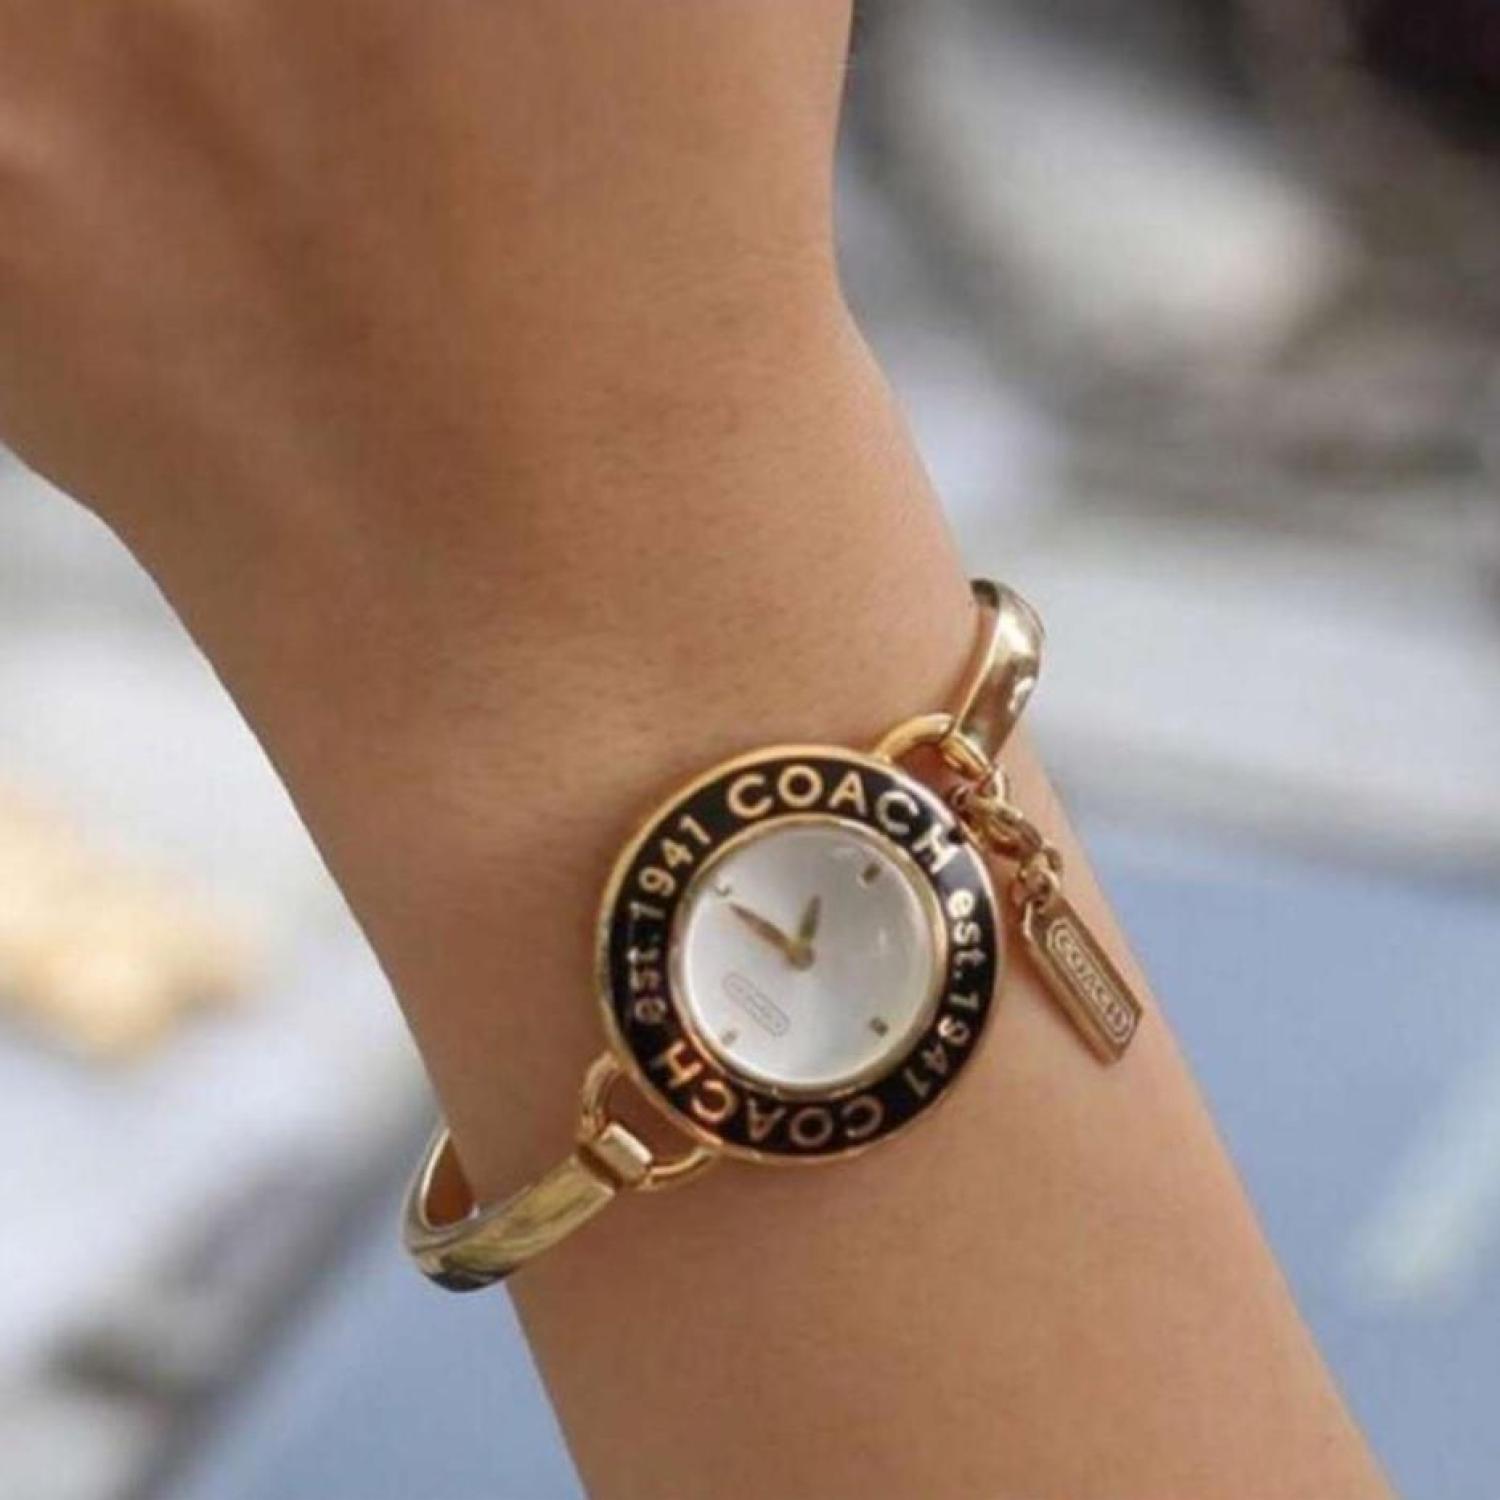 Coach Bangle Watch review and price